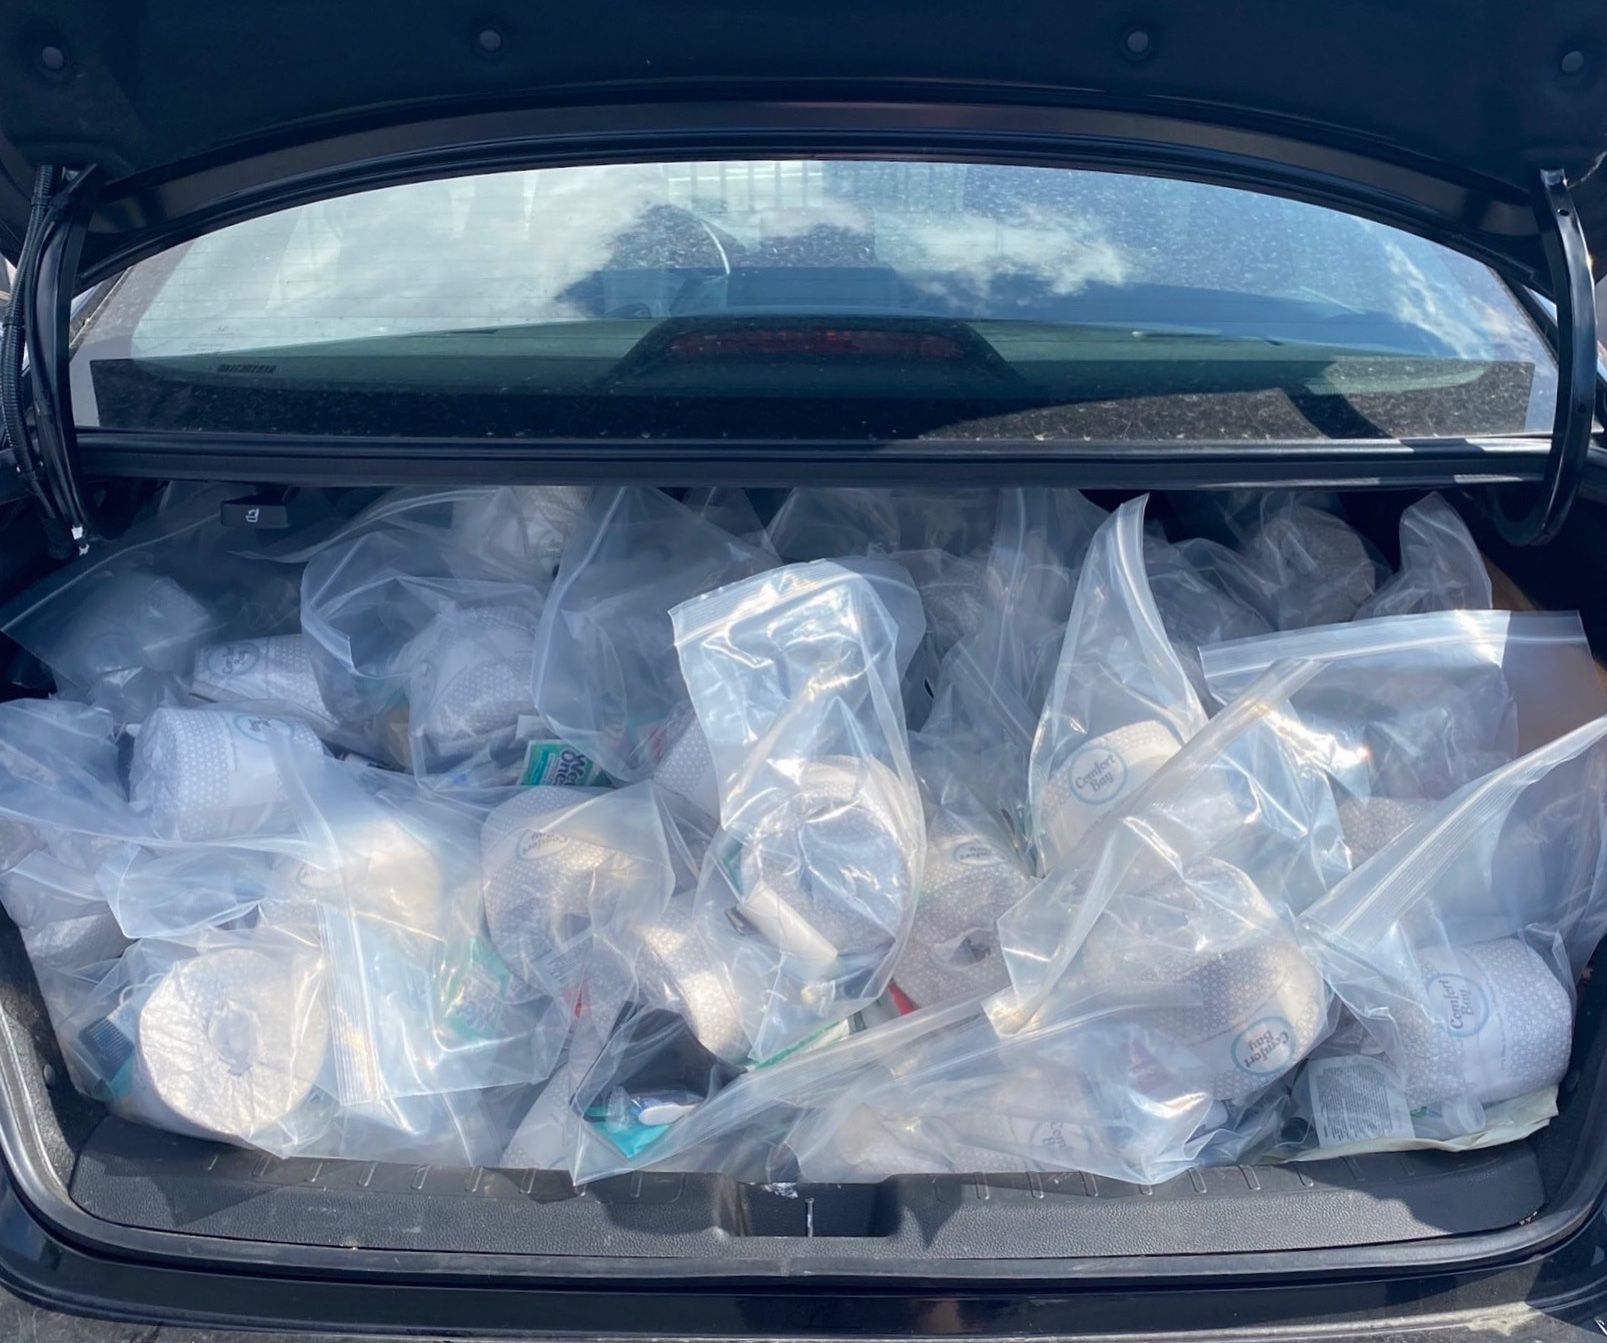 Bagged hygeine kits in the trunk of a car to be distributed from LA Street Care